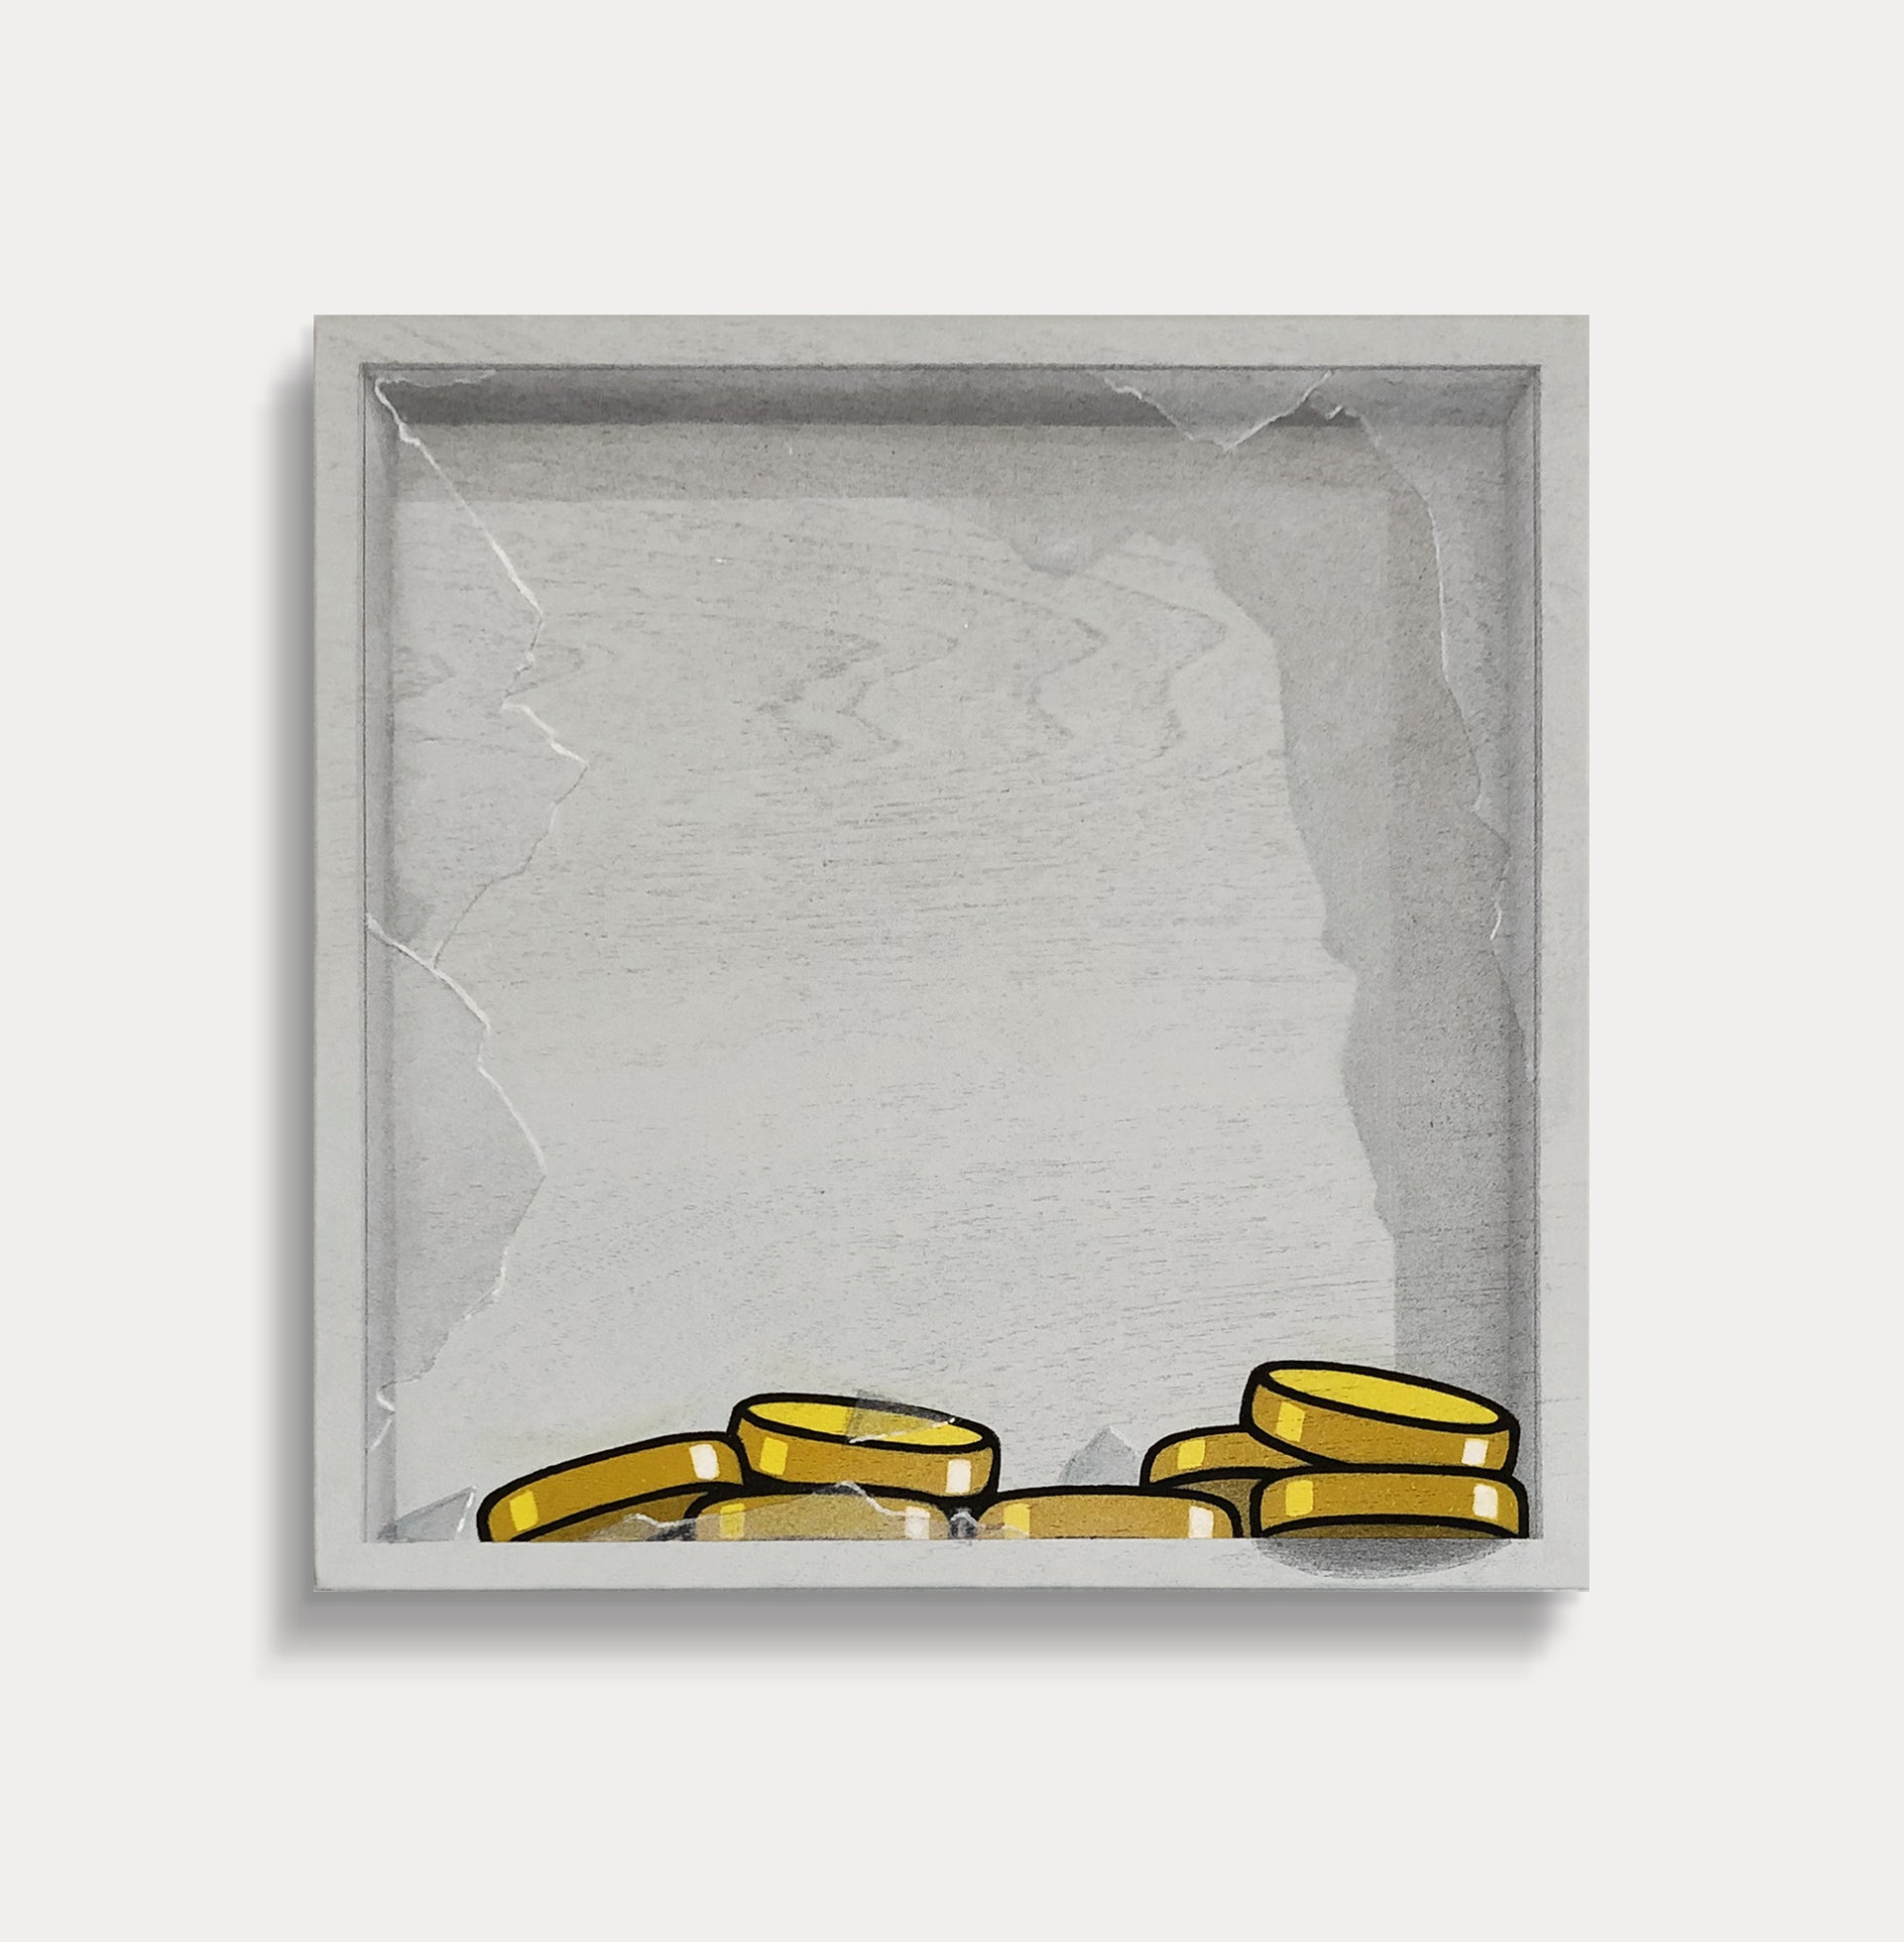 "7 Gold Coins ($420)" by E.LEE